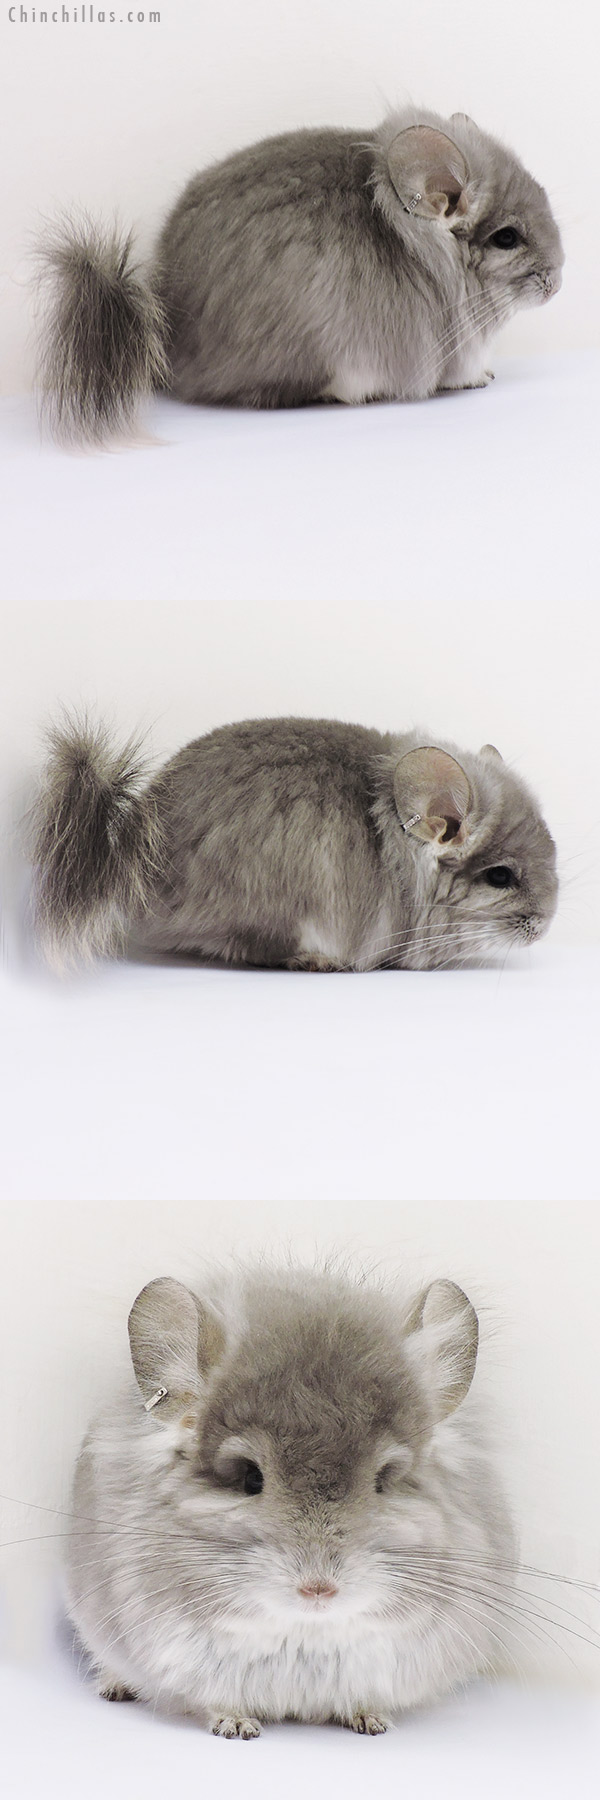 Chinchilla or related item offered for sale or export on Chinchillas.com - 16203 Exceptional Violet  Royal Persian Angora Male Chinchilla with Lion Mane